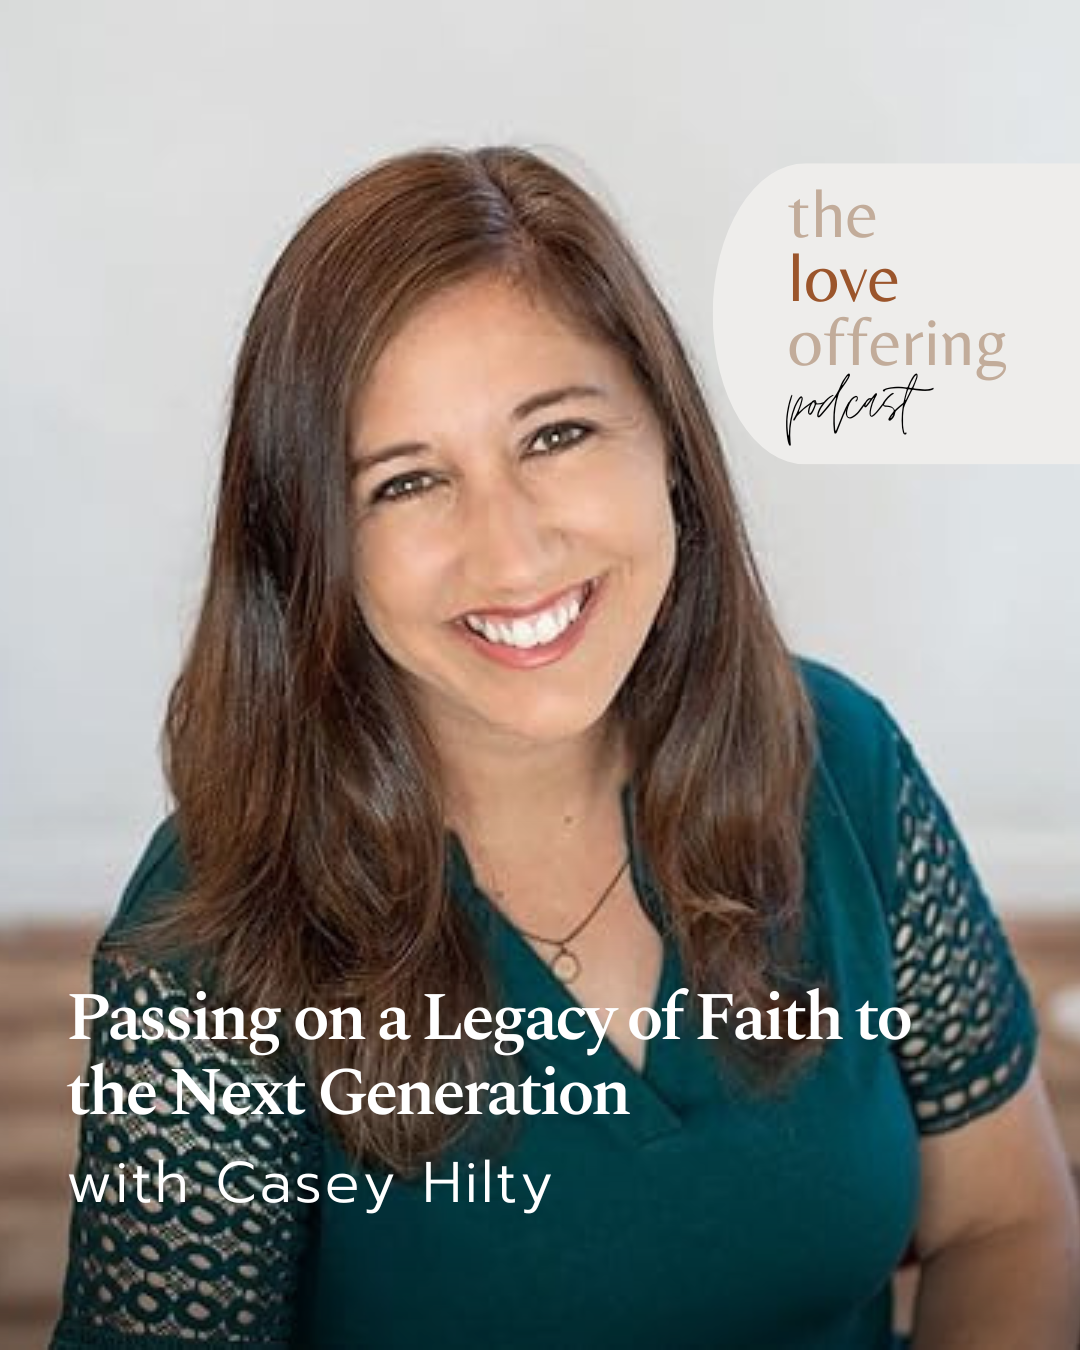 S6E10 Show Notes: Passing on a Legacy of Faith to the Next Generation with Casey Hilty